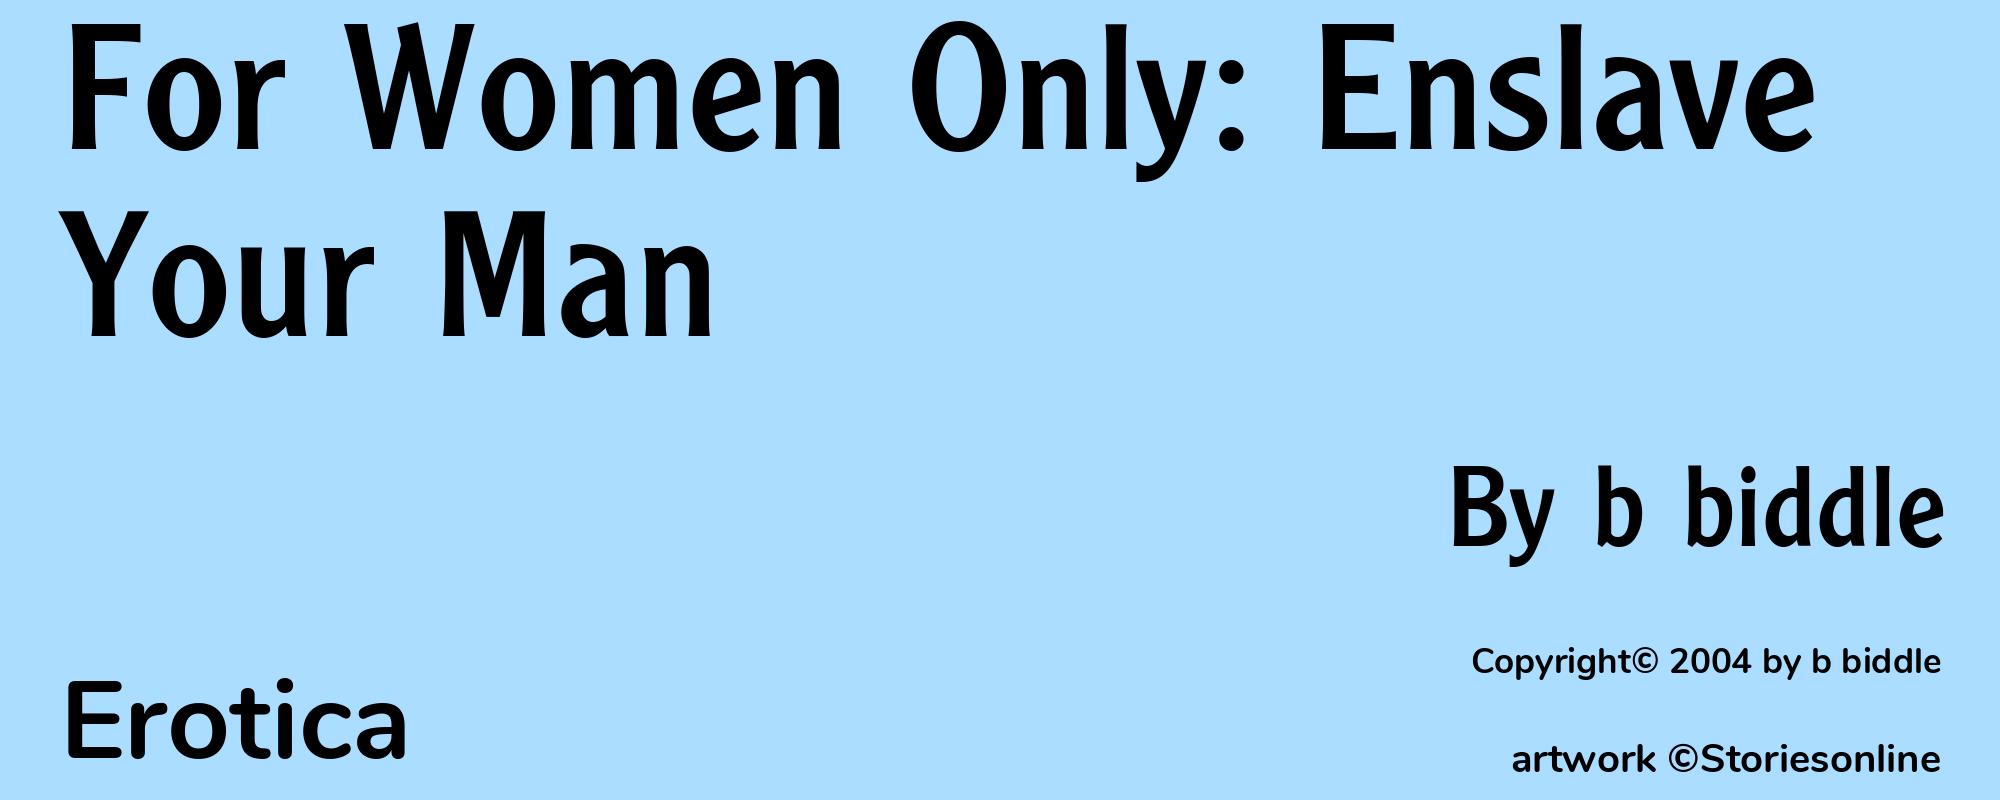 For Women Only: Enslave Your Man - Cover